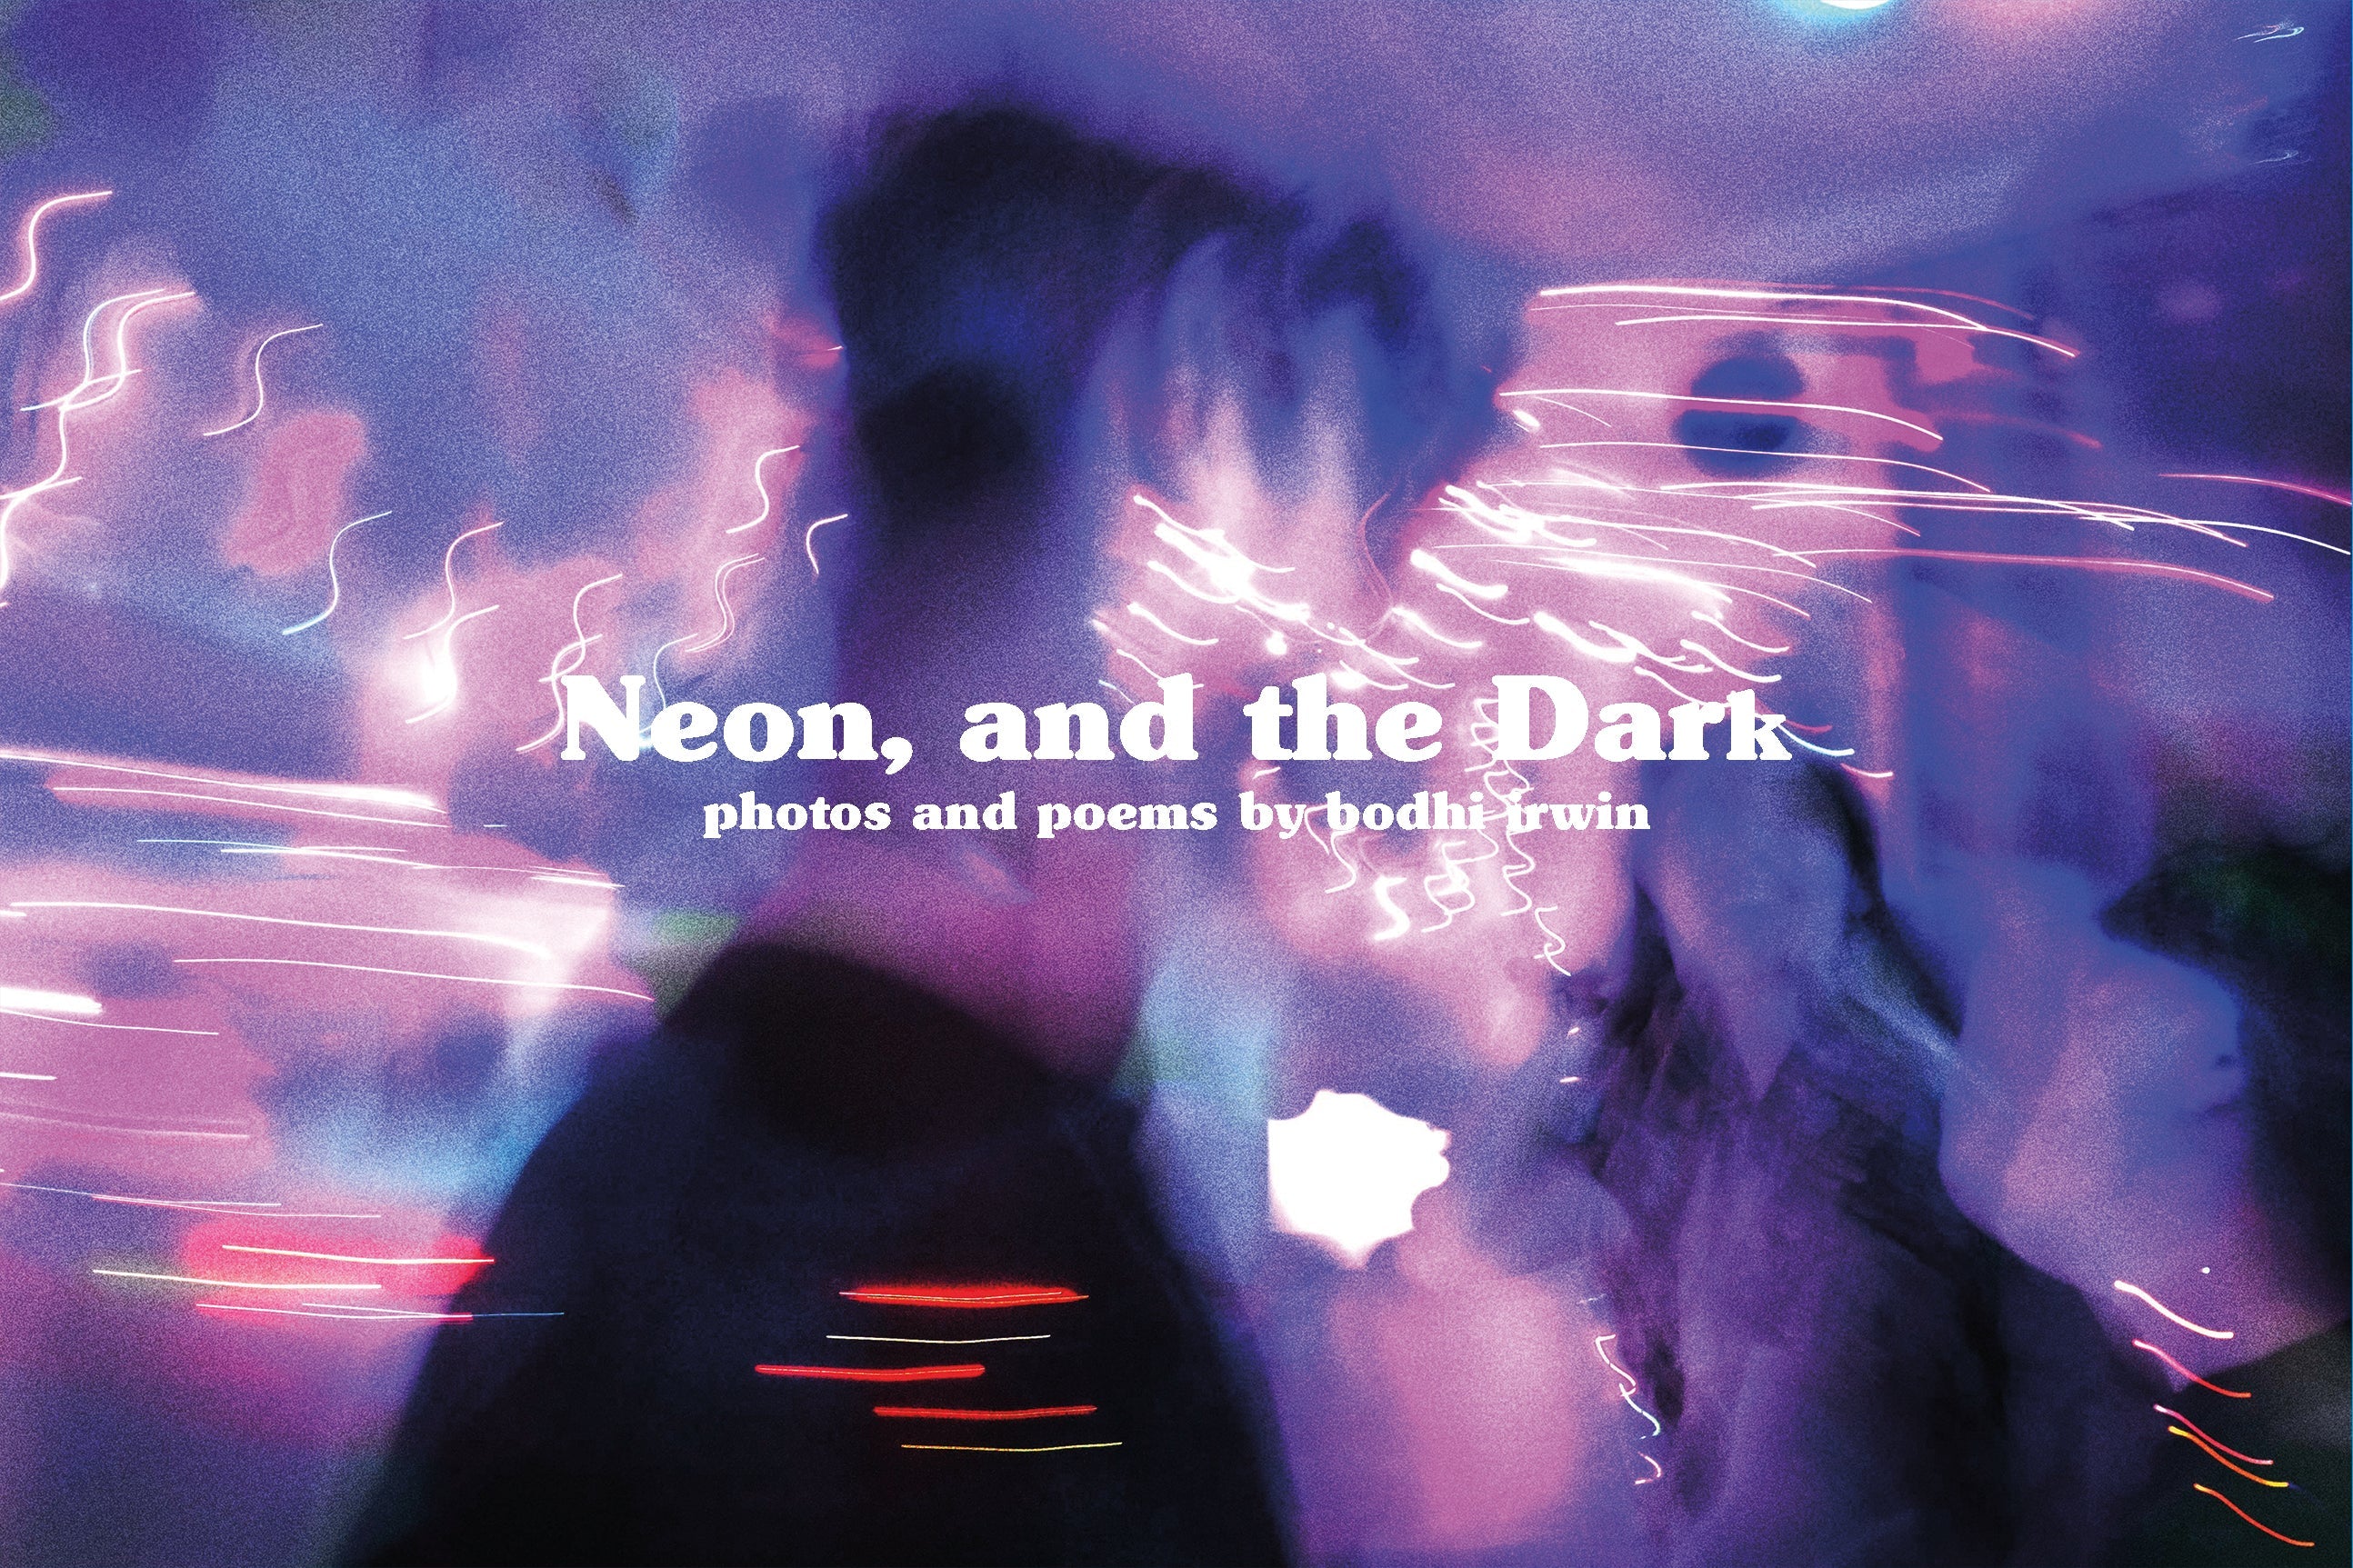 Neon, and the Dark is a 34-page full-colour photo zine by Bodhi Pantony Irwin (sibling of Sage Pantony) that follows several teenagers through a night in their hometown as they wander, ponder, and explore. It is a surreal coming of age story that takes place over the course of a single night.